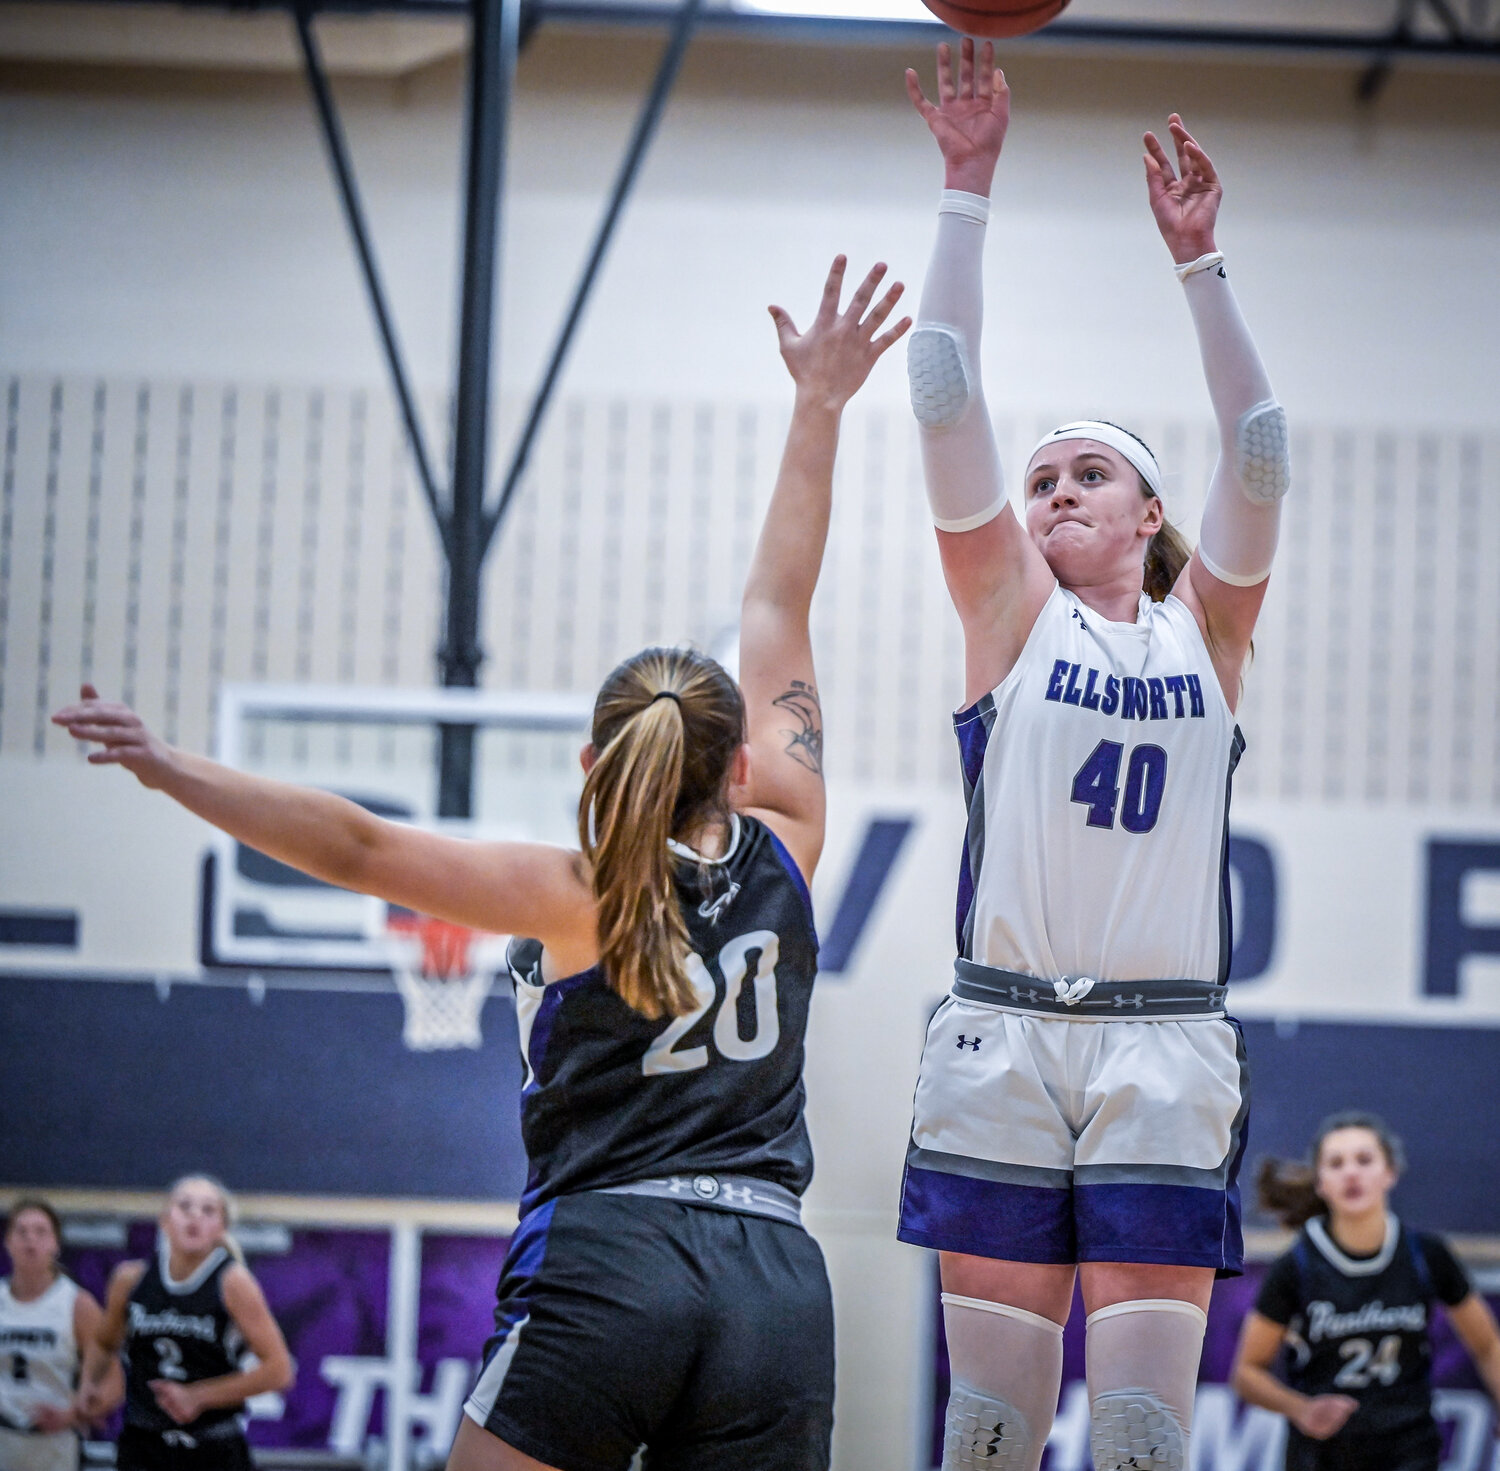 Morgan Halverson shoots over the top of a defender in the Panthers’ game against Durand earlier this season.